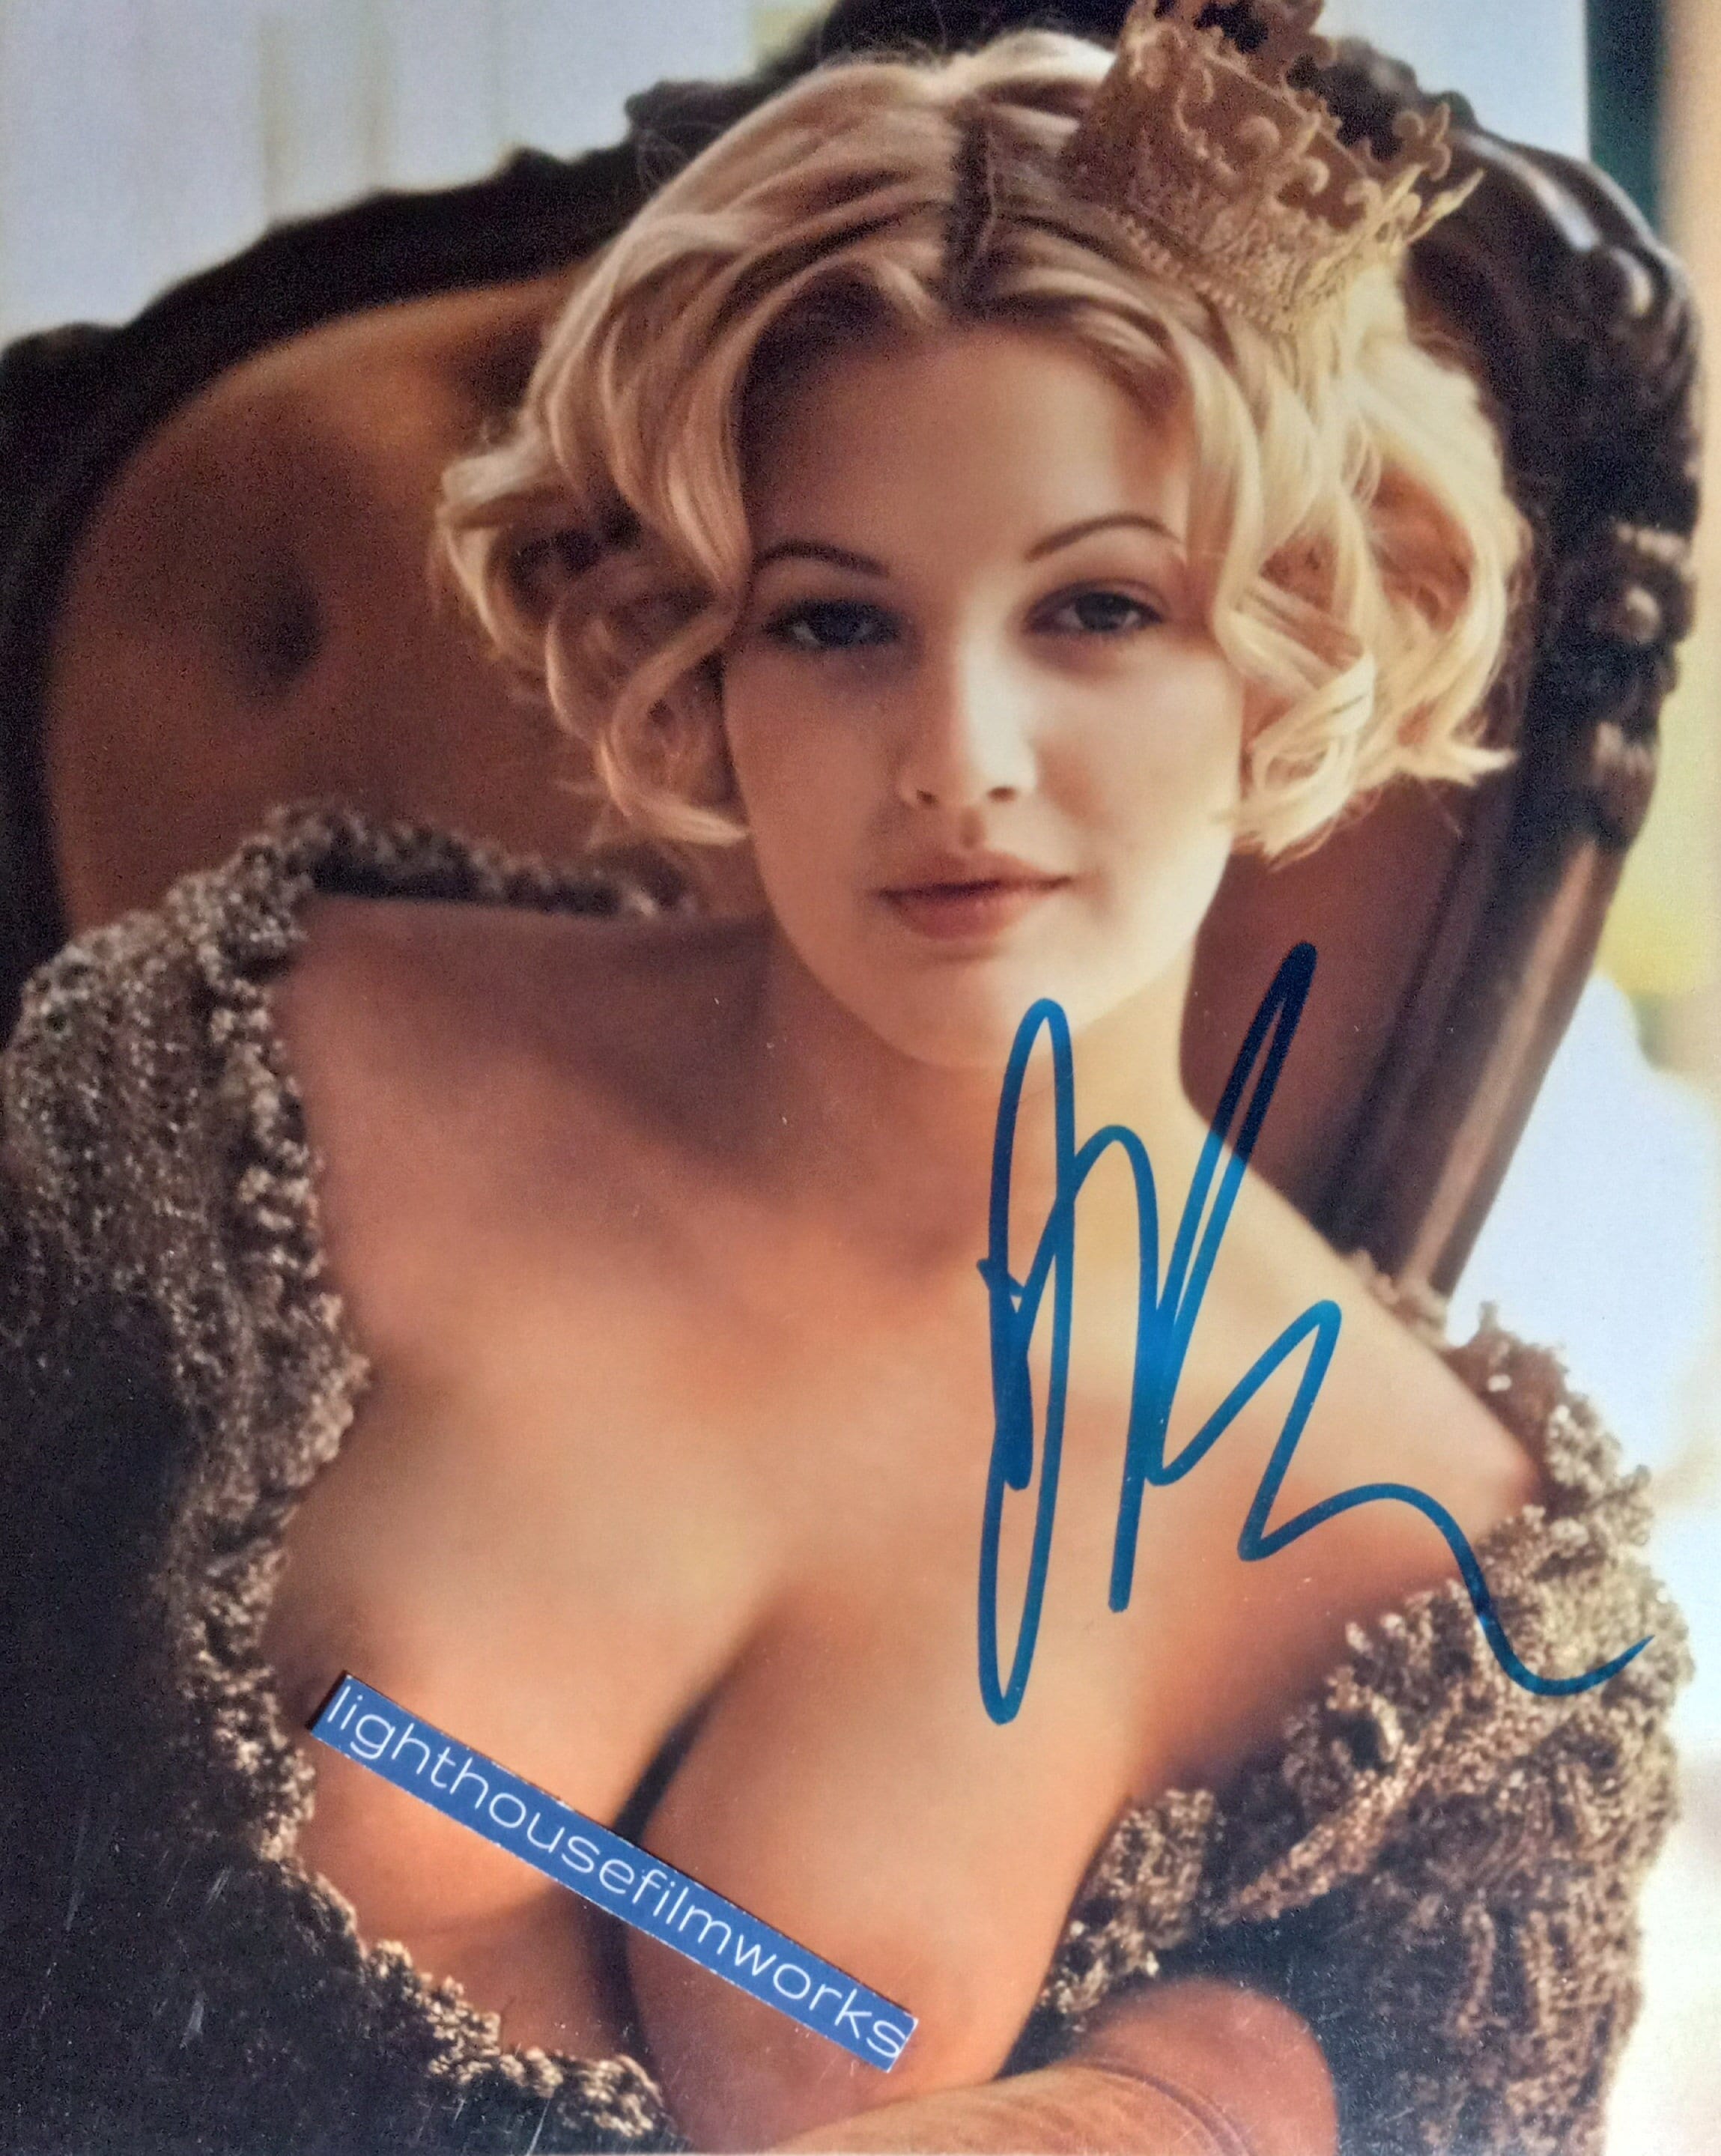 caroline soh recommends drew barrymore playboy spread pic